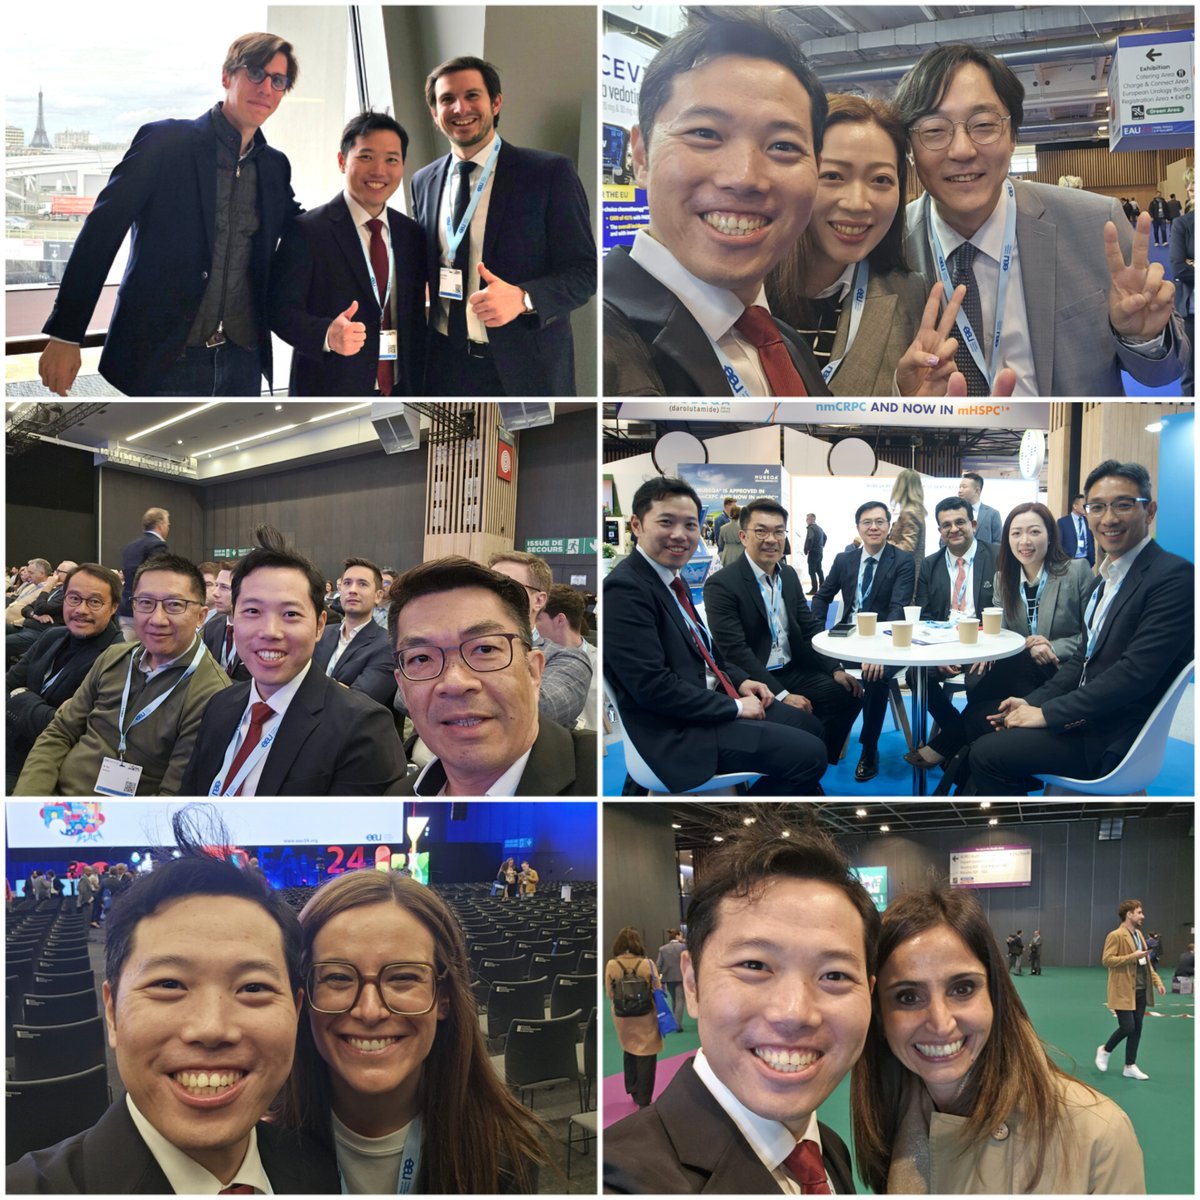 Exciting first day at #EAU24! Starting off with awesome Endourology sessions, and meeting friends! @exkeller @ameliapietr1 @kmoretry @albasierrad @eug20miglia @emiliani_e @fpanthier @steffiyuen @UrologyTiong @vturodynamic @DocGauhar @sproietti81 @DrRaymondKo @EndoLuminalEndo…